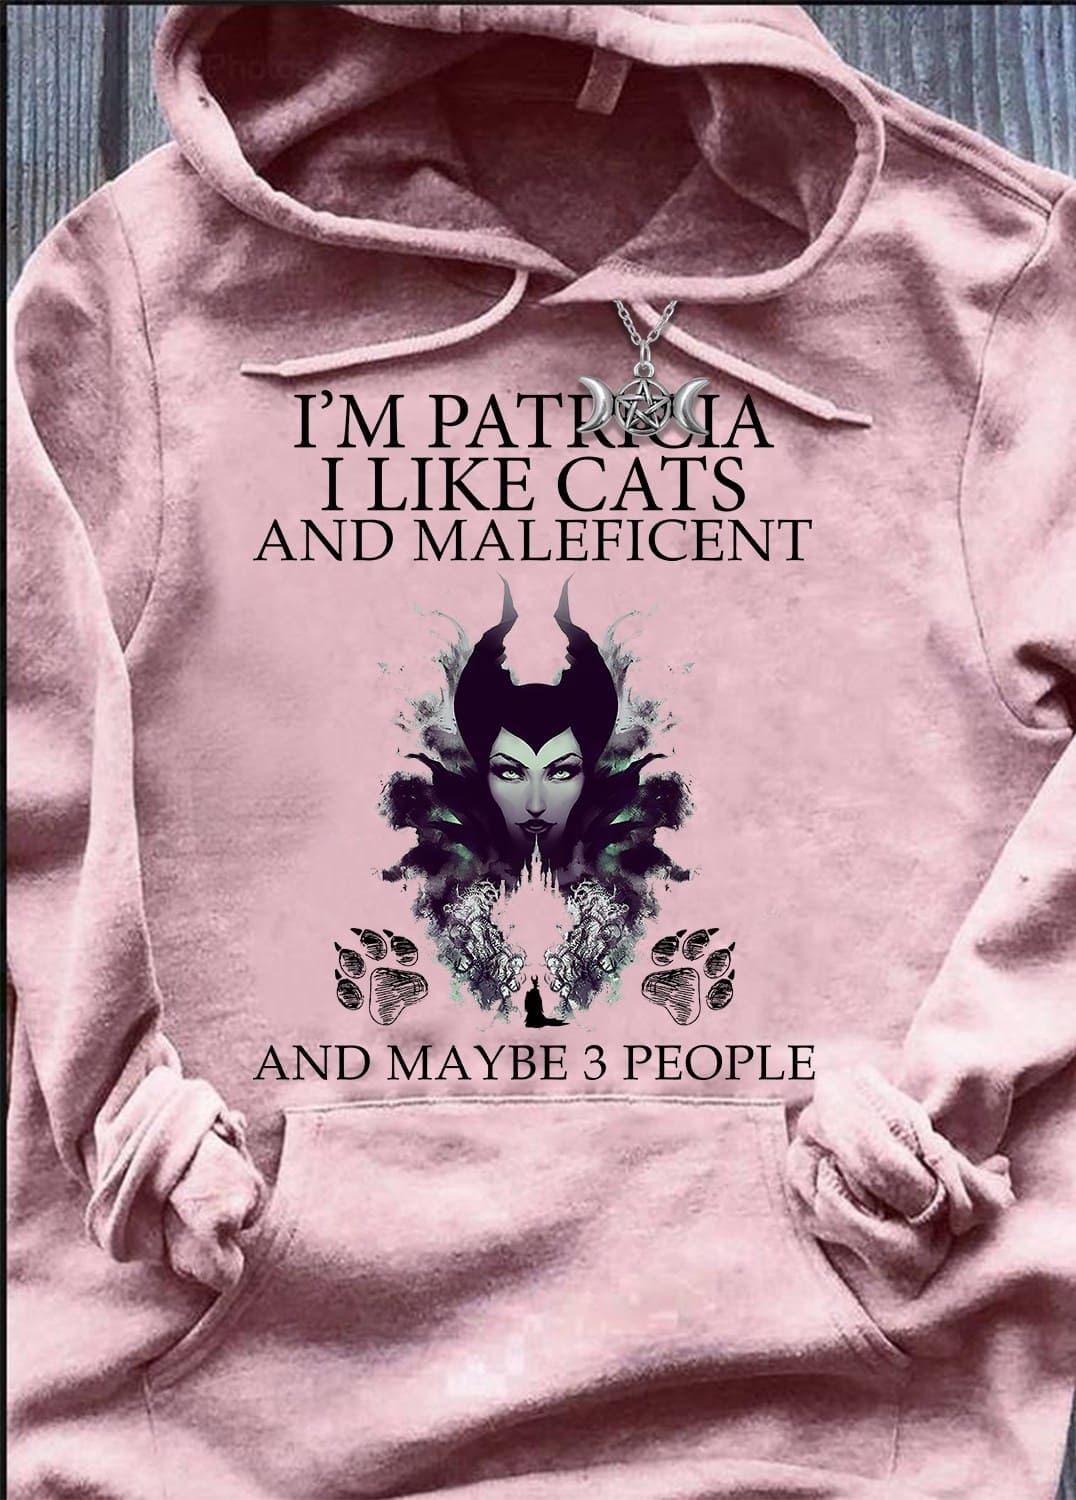 I'm Patricia I like cats and maleficent and maybe 3 people - Maleficent the villain